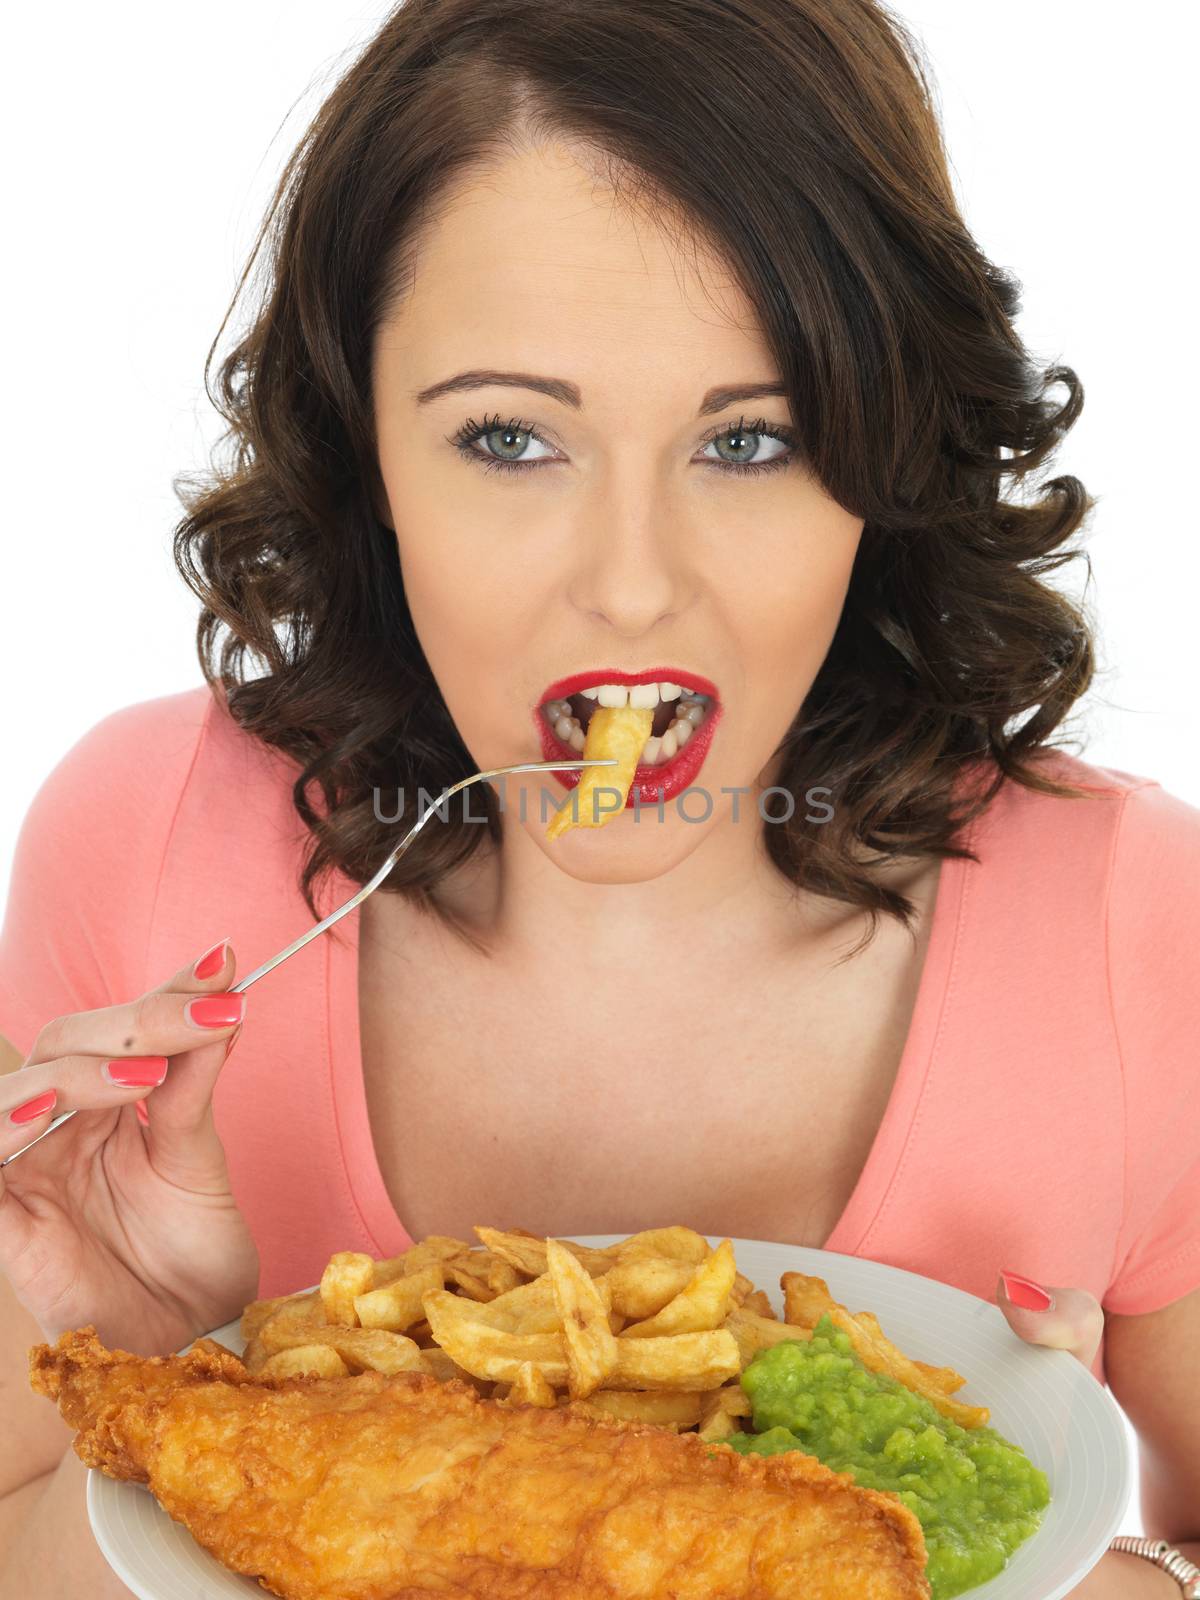 Young Woman Eating Fish and Chips with Mushy Peas by Whiteboxmedia